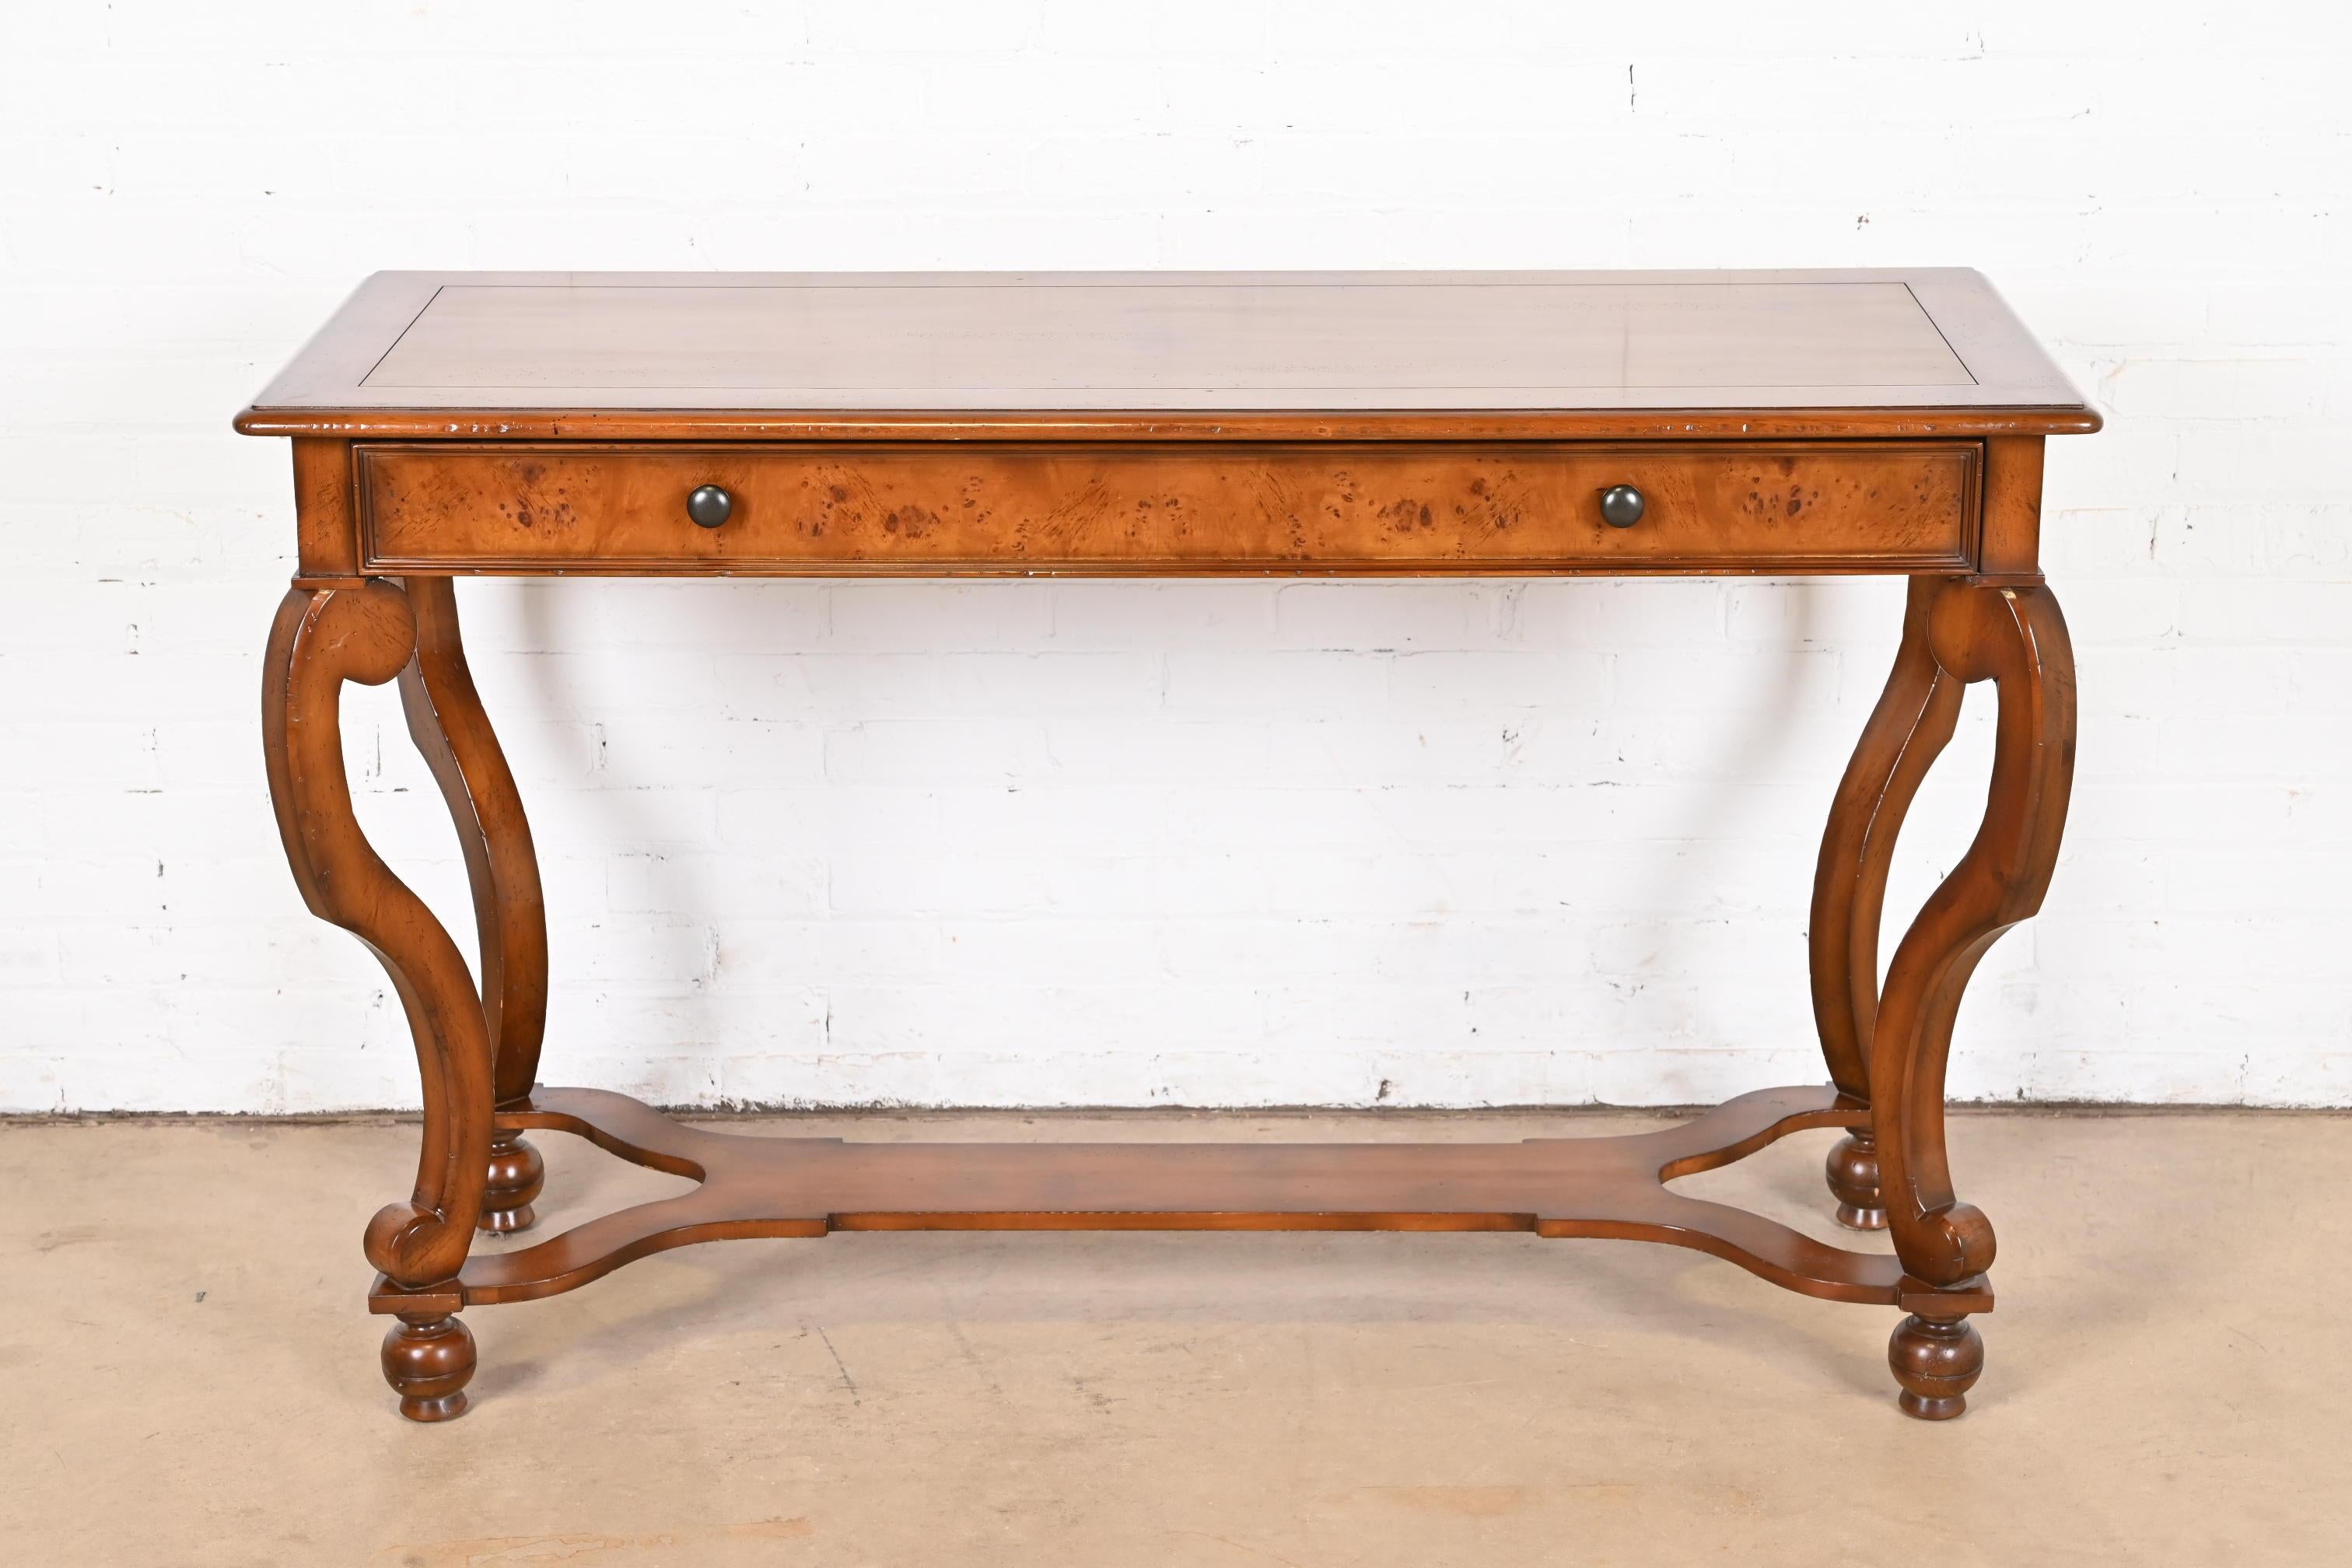 Baker Furniture Italian Provincial Cherry and Burl Wood Console or Sofa Table In Good Condition For Sale In South Bend, IN